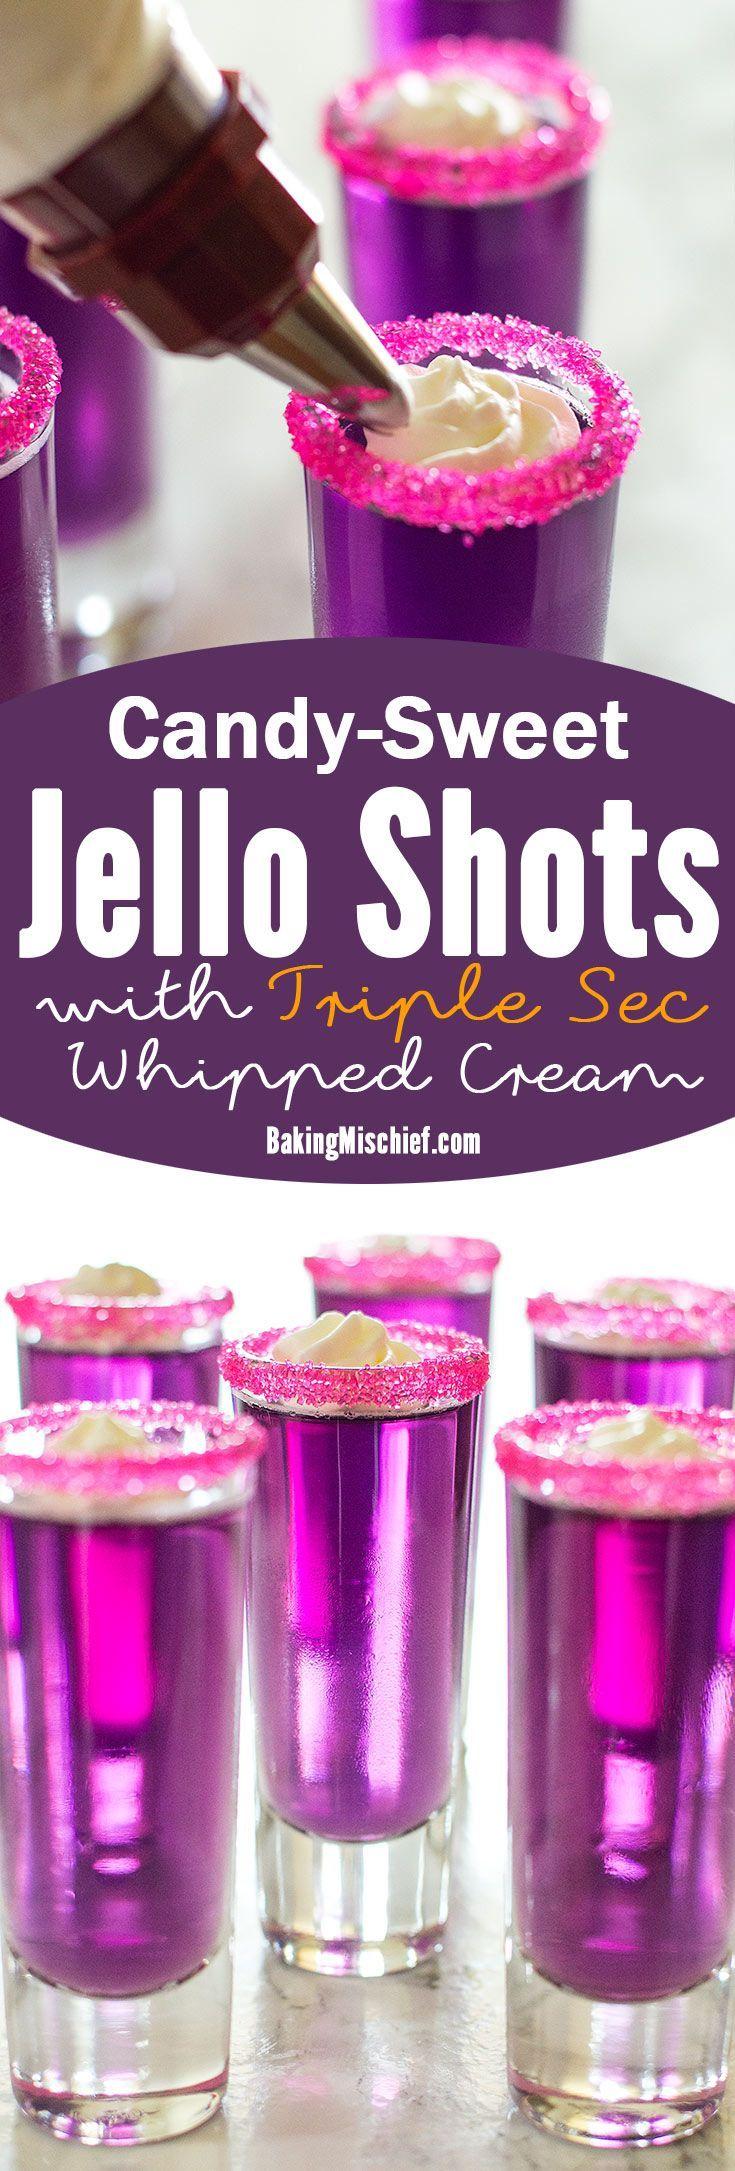 Hochzeit - Candy-Sweet Jello Shots With Triple Sec Whipped Cream